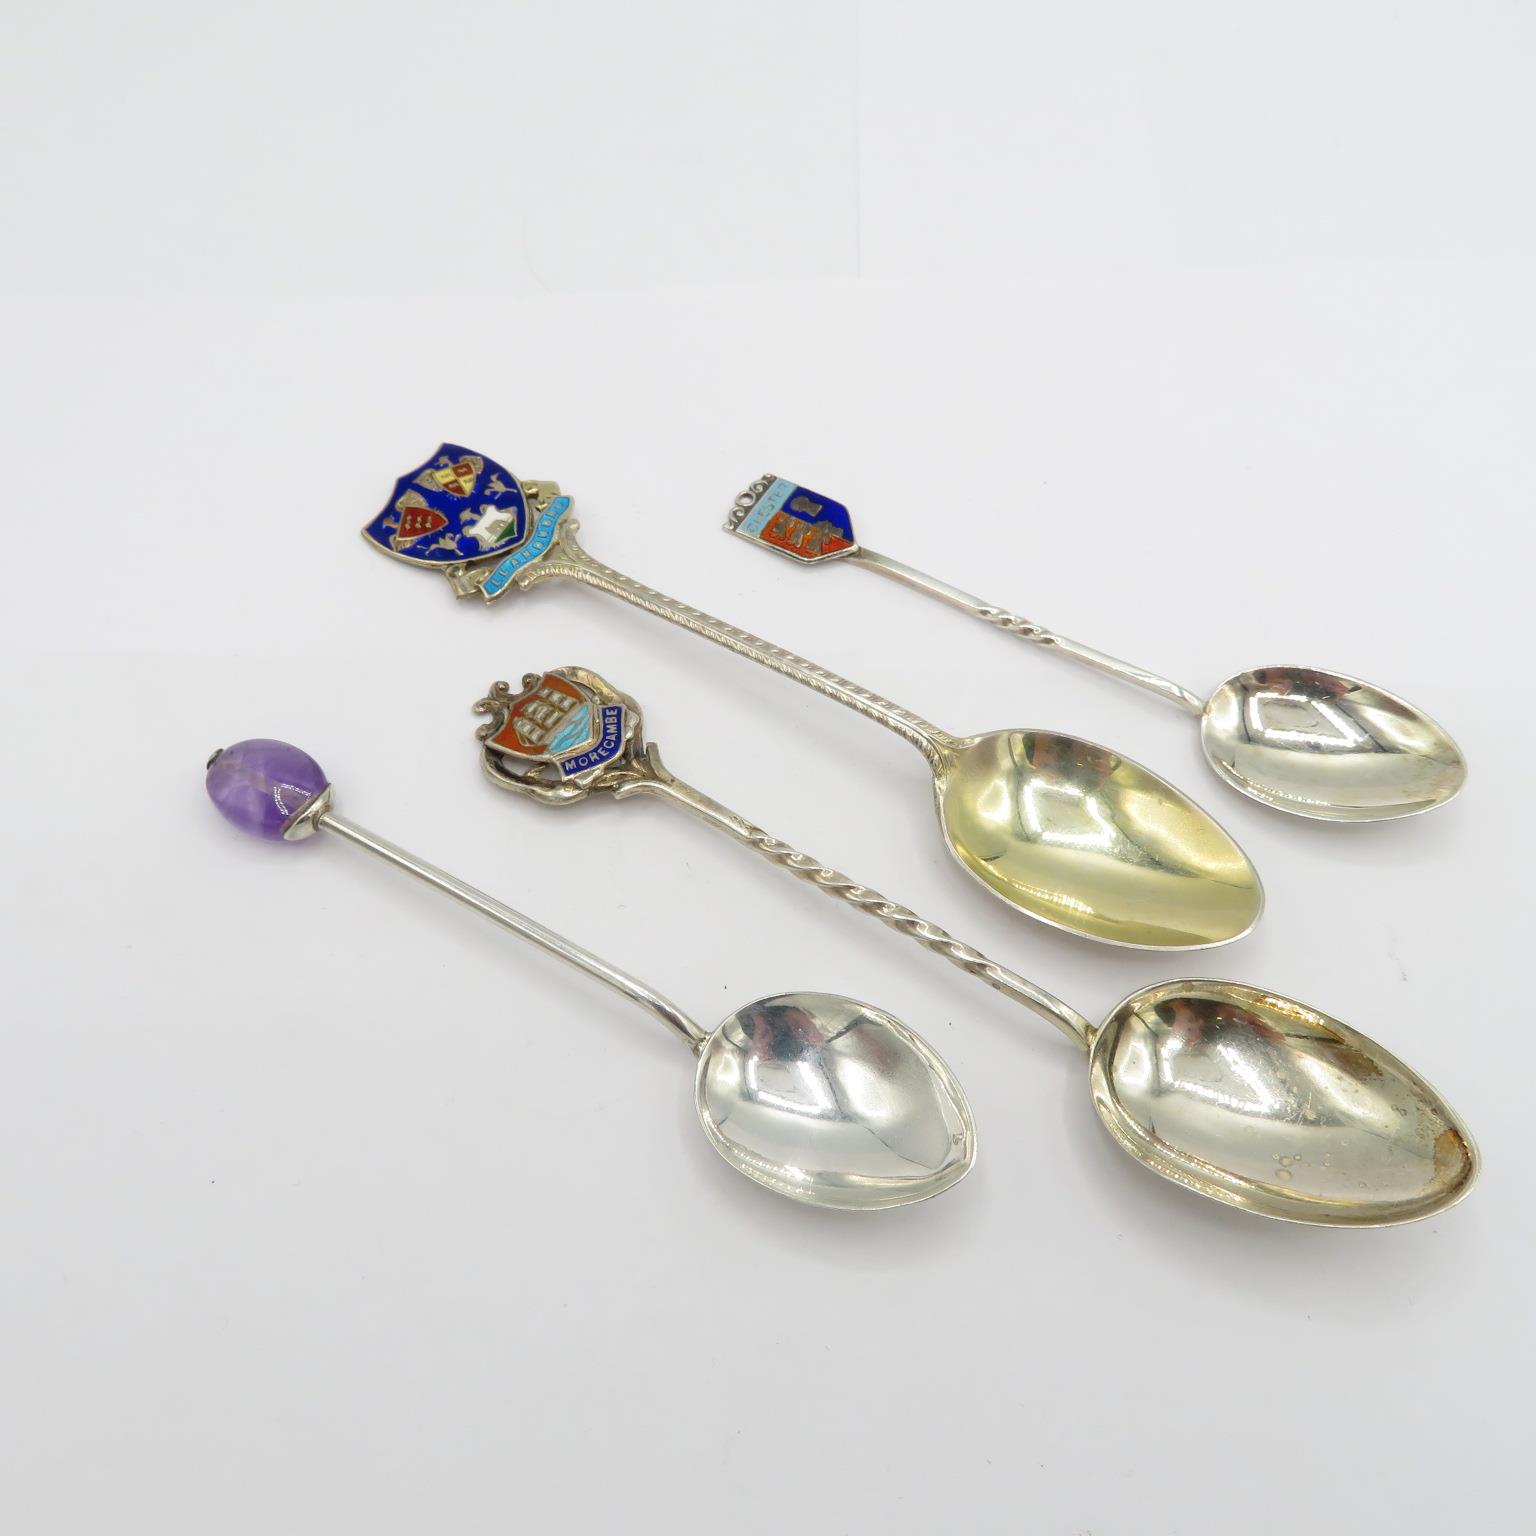 112g HM silver spoons - Image 3 of 4